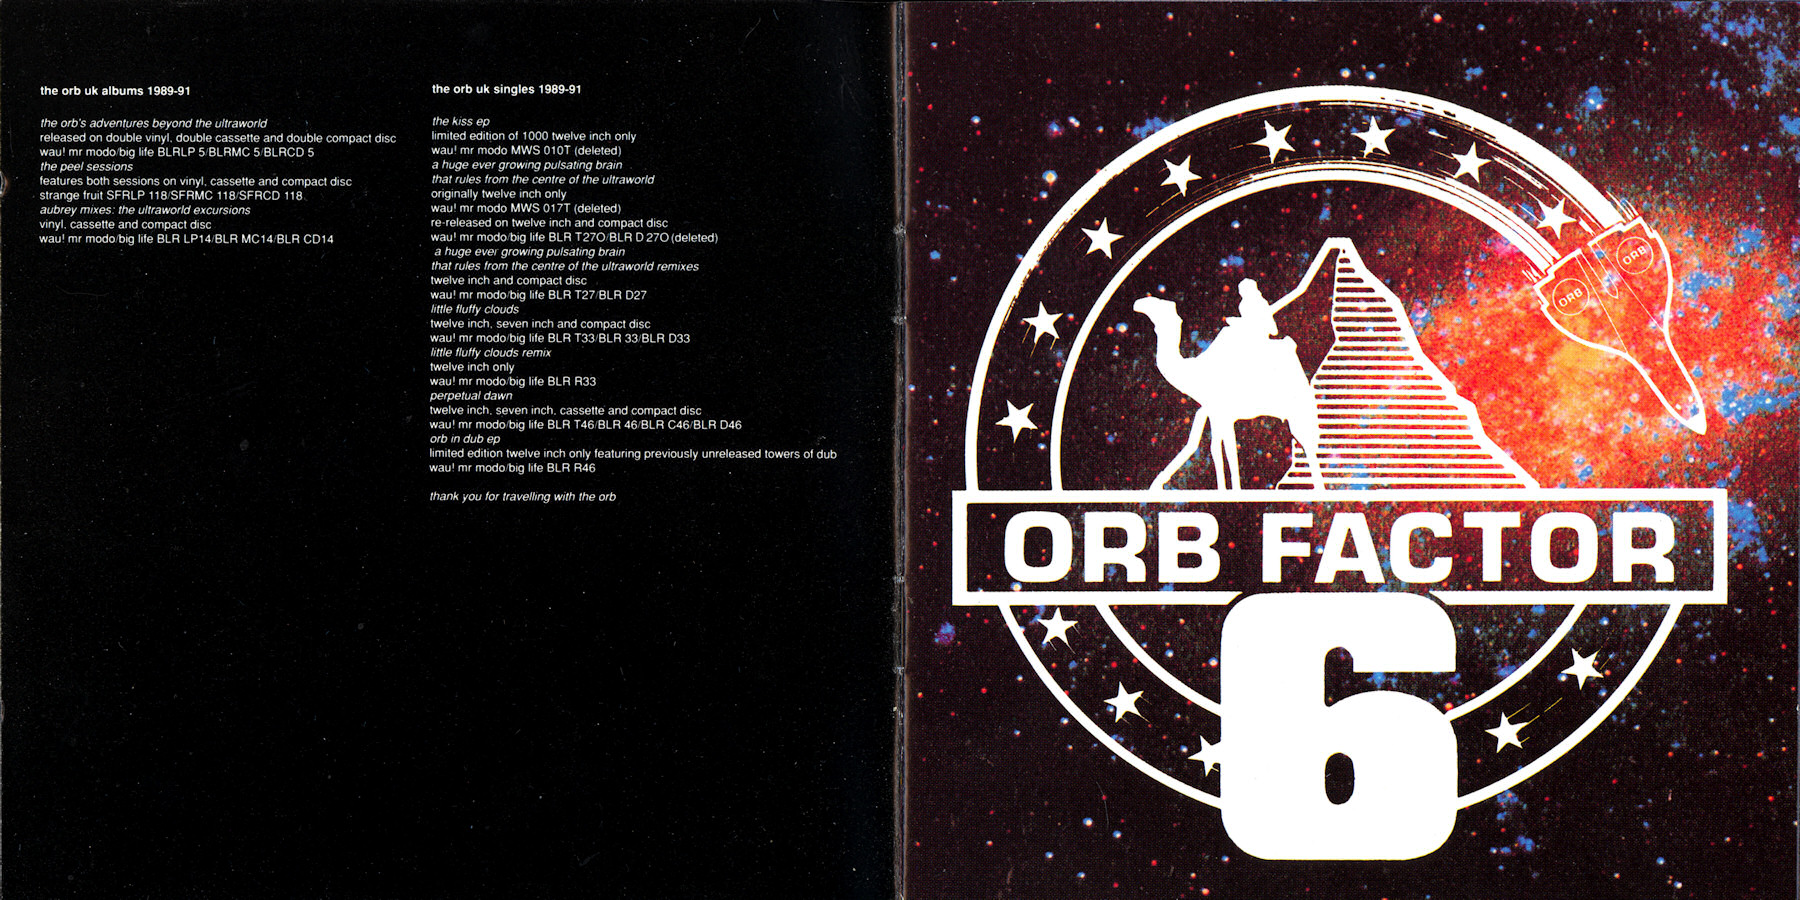 The Orb 1991. The Orb's Adventures Beyond the Ultraworld the Orb. The Orb - little fluffy clouds.